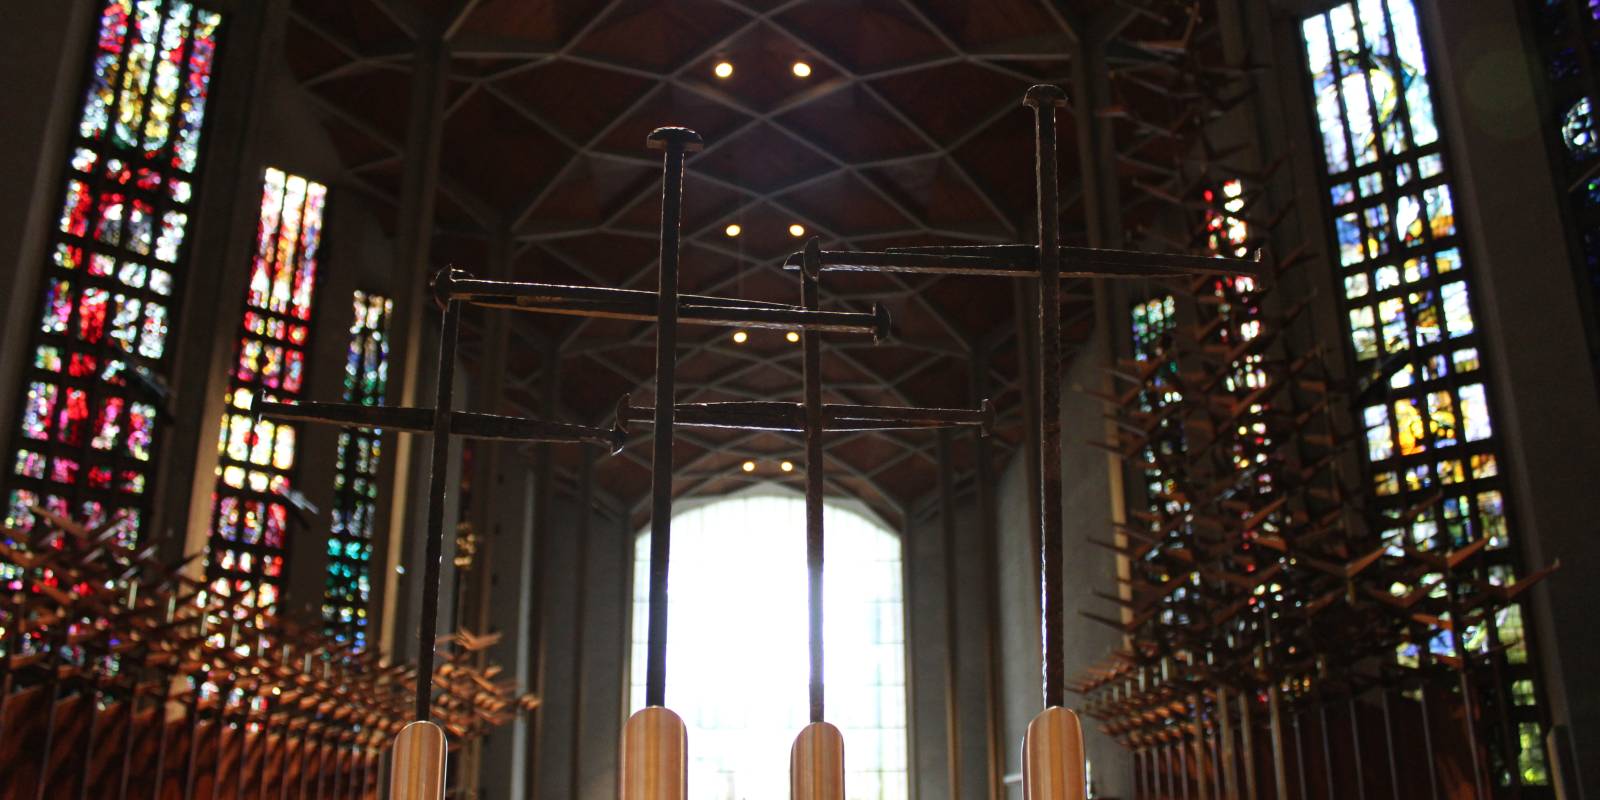 Cross of Nails x 4 in Coventry Cathedral 